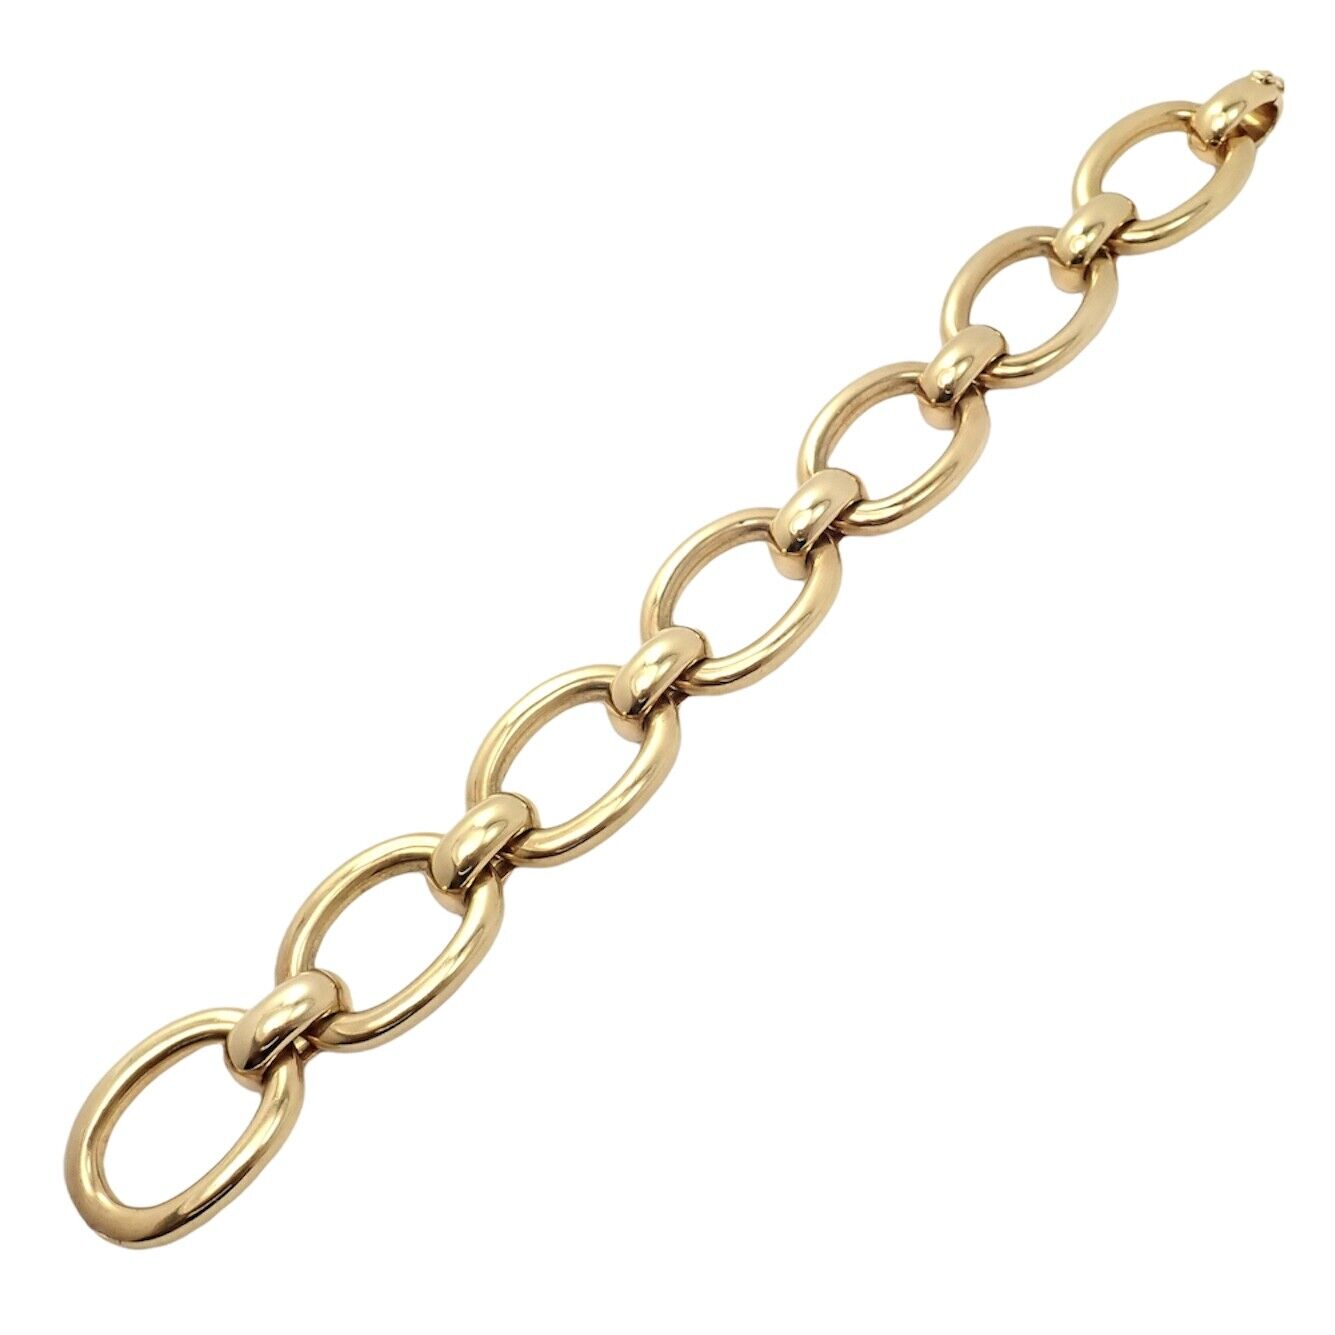 Authentic! Cartier 18k Yellow Gold Large Oval Link Bracelet